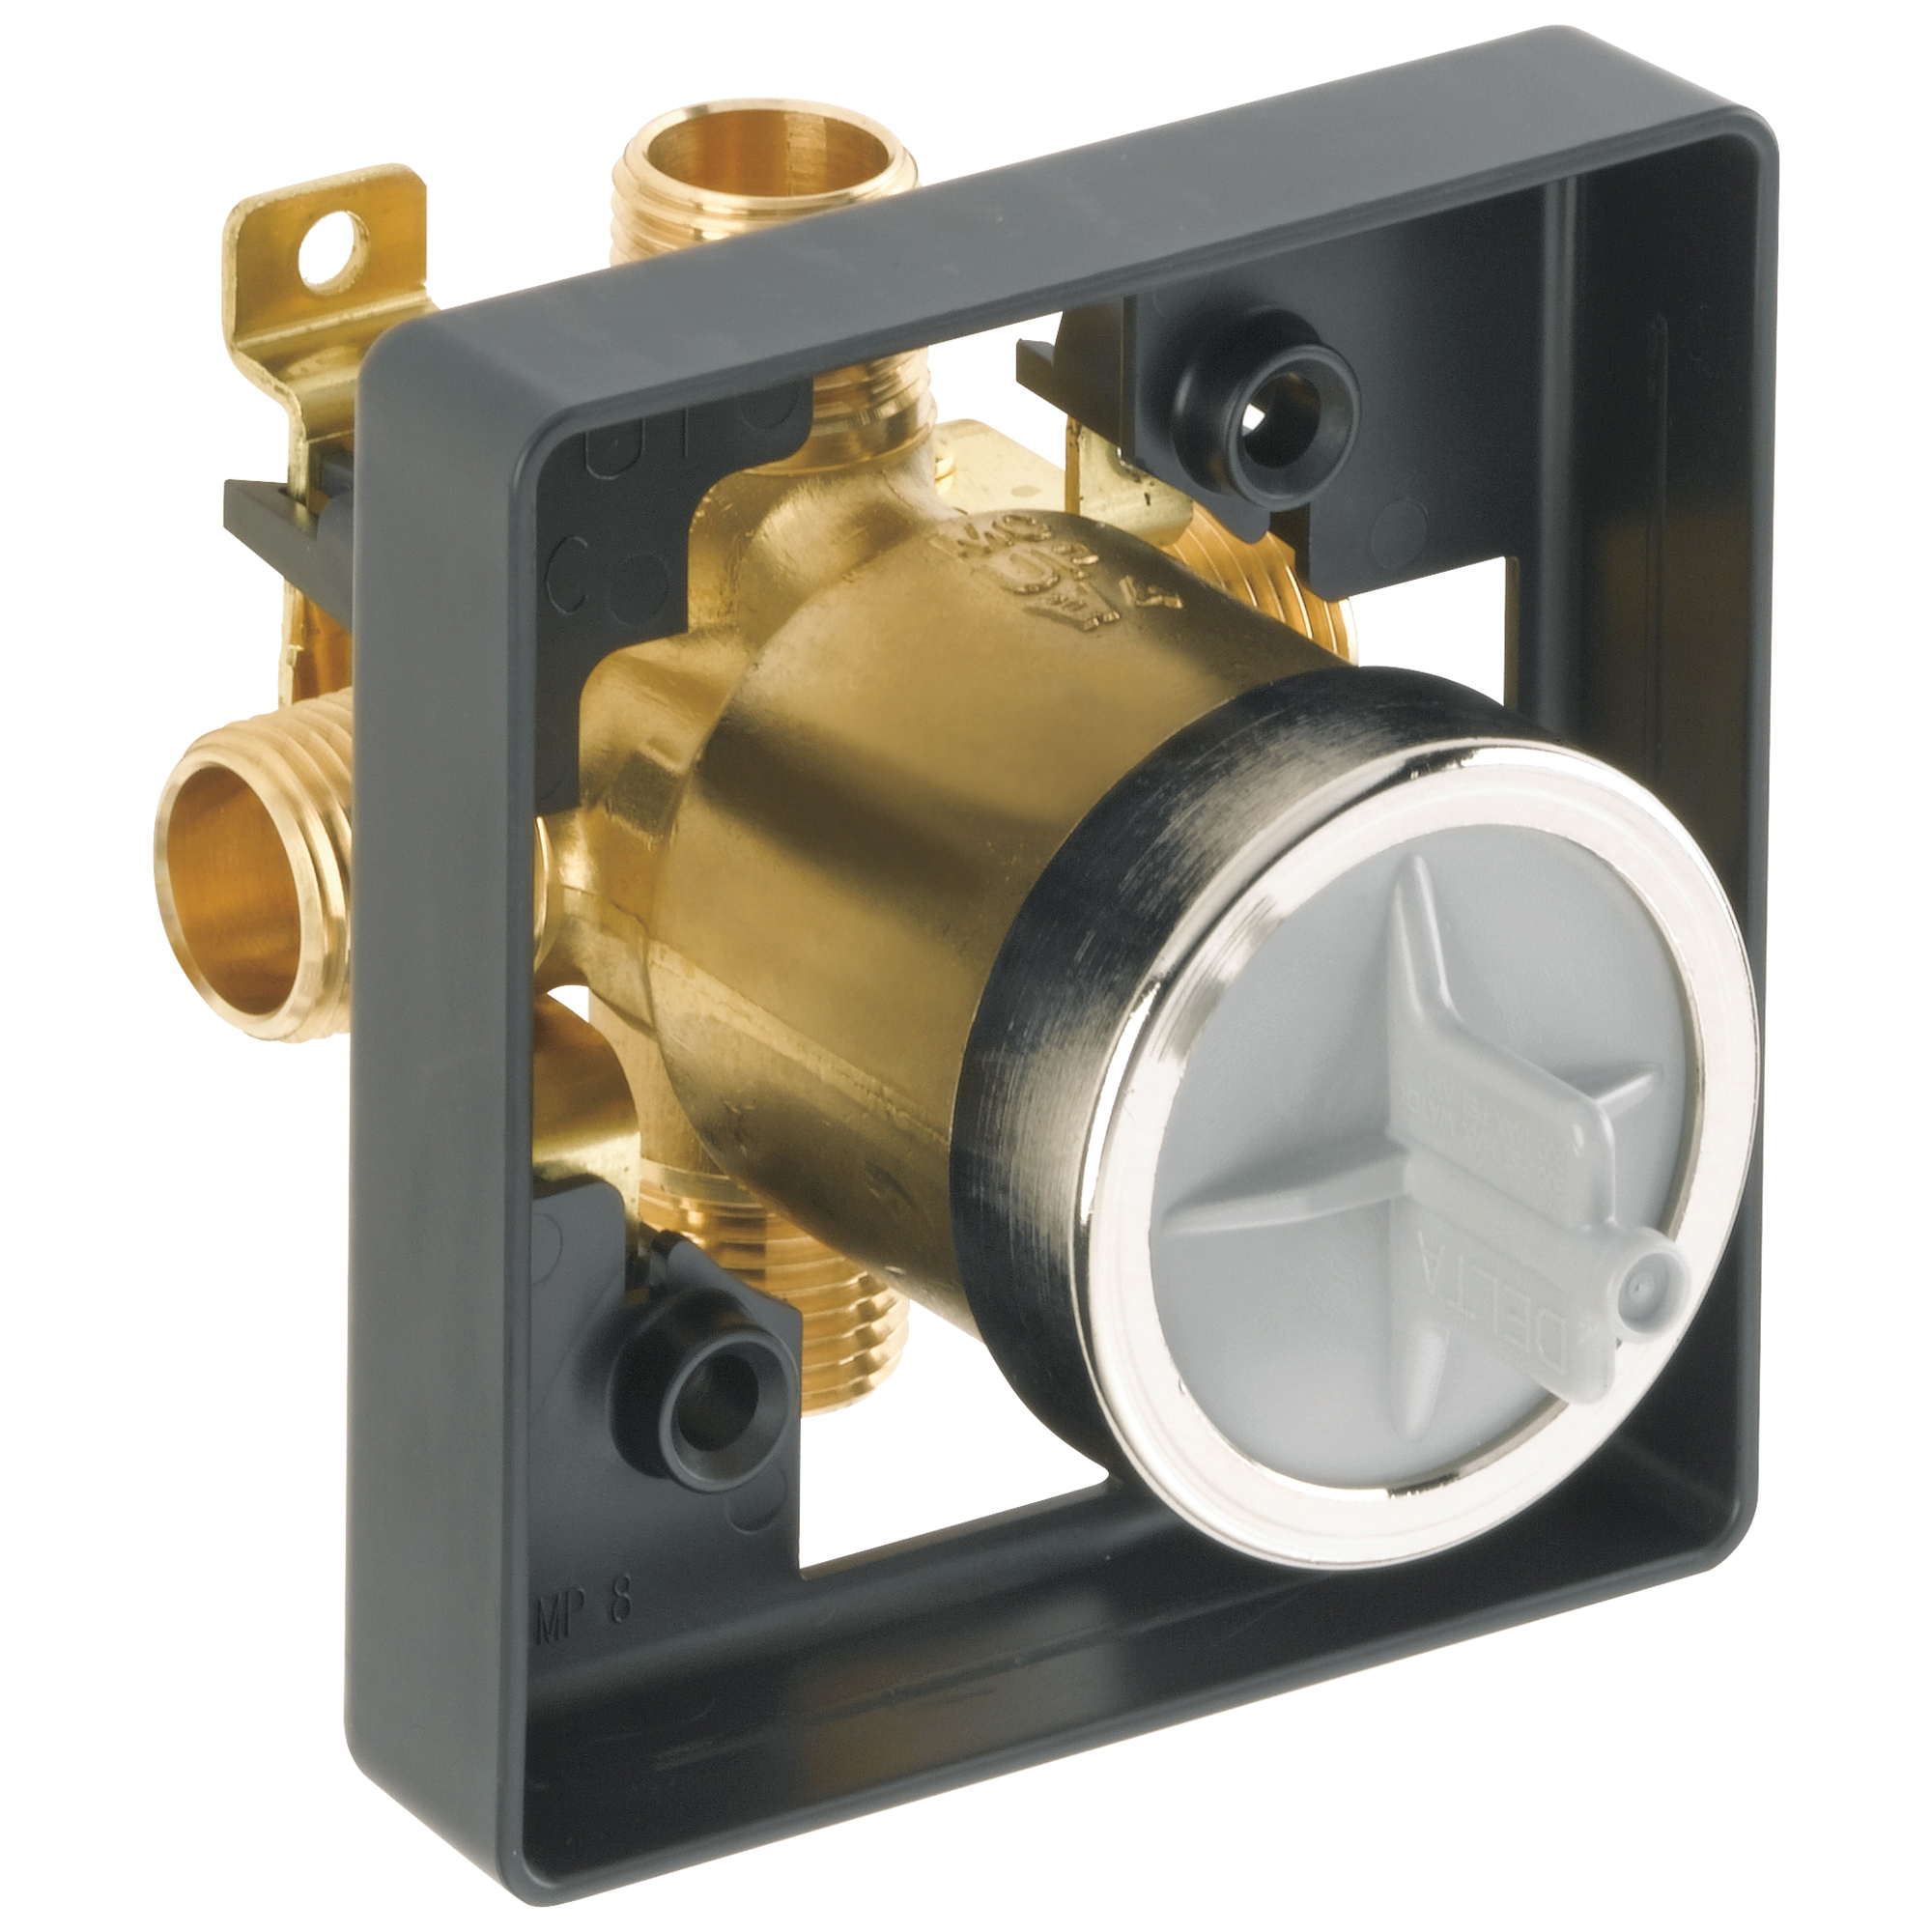 DELTA® R10000-UNBX Universal Tub and Shower Rough-In Valve Body, Forged Brass Body, Domestic